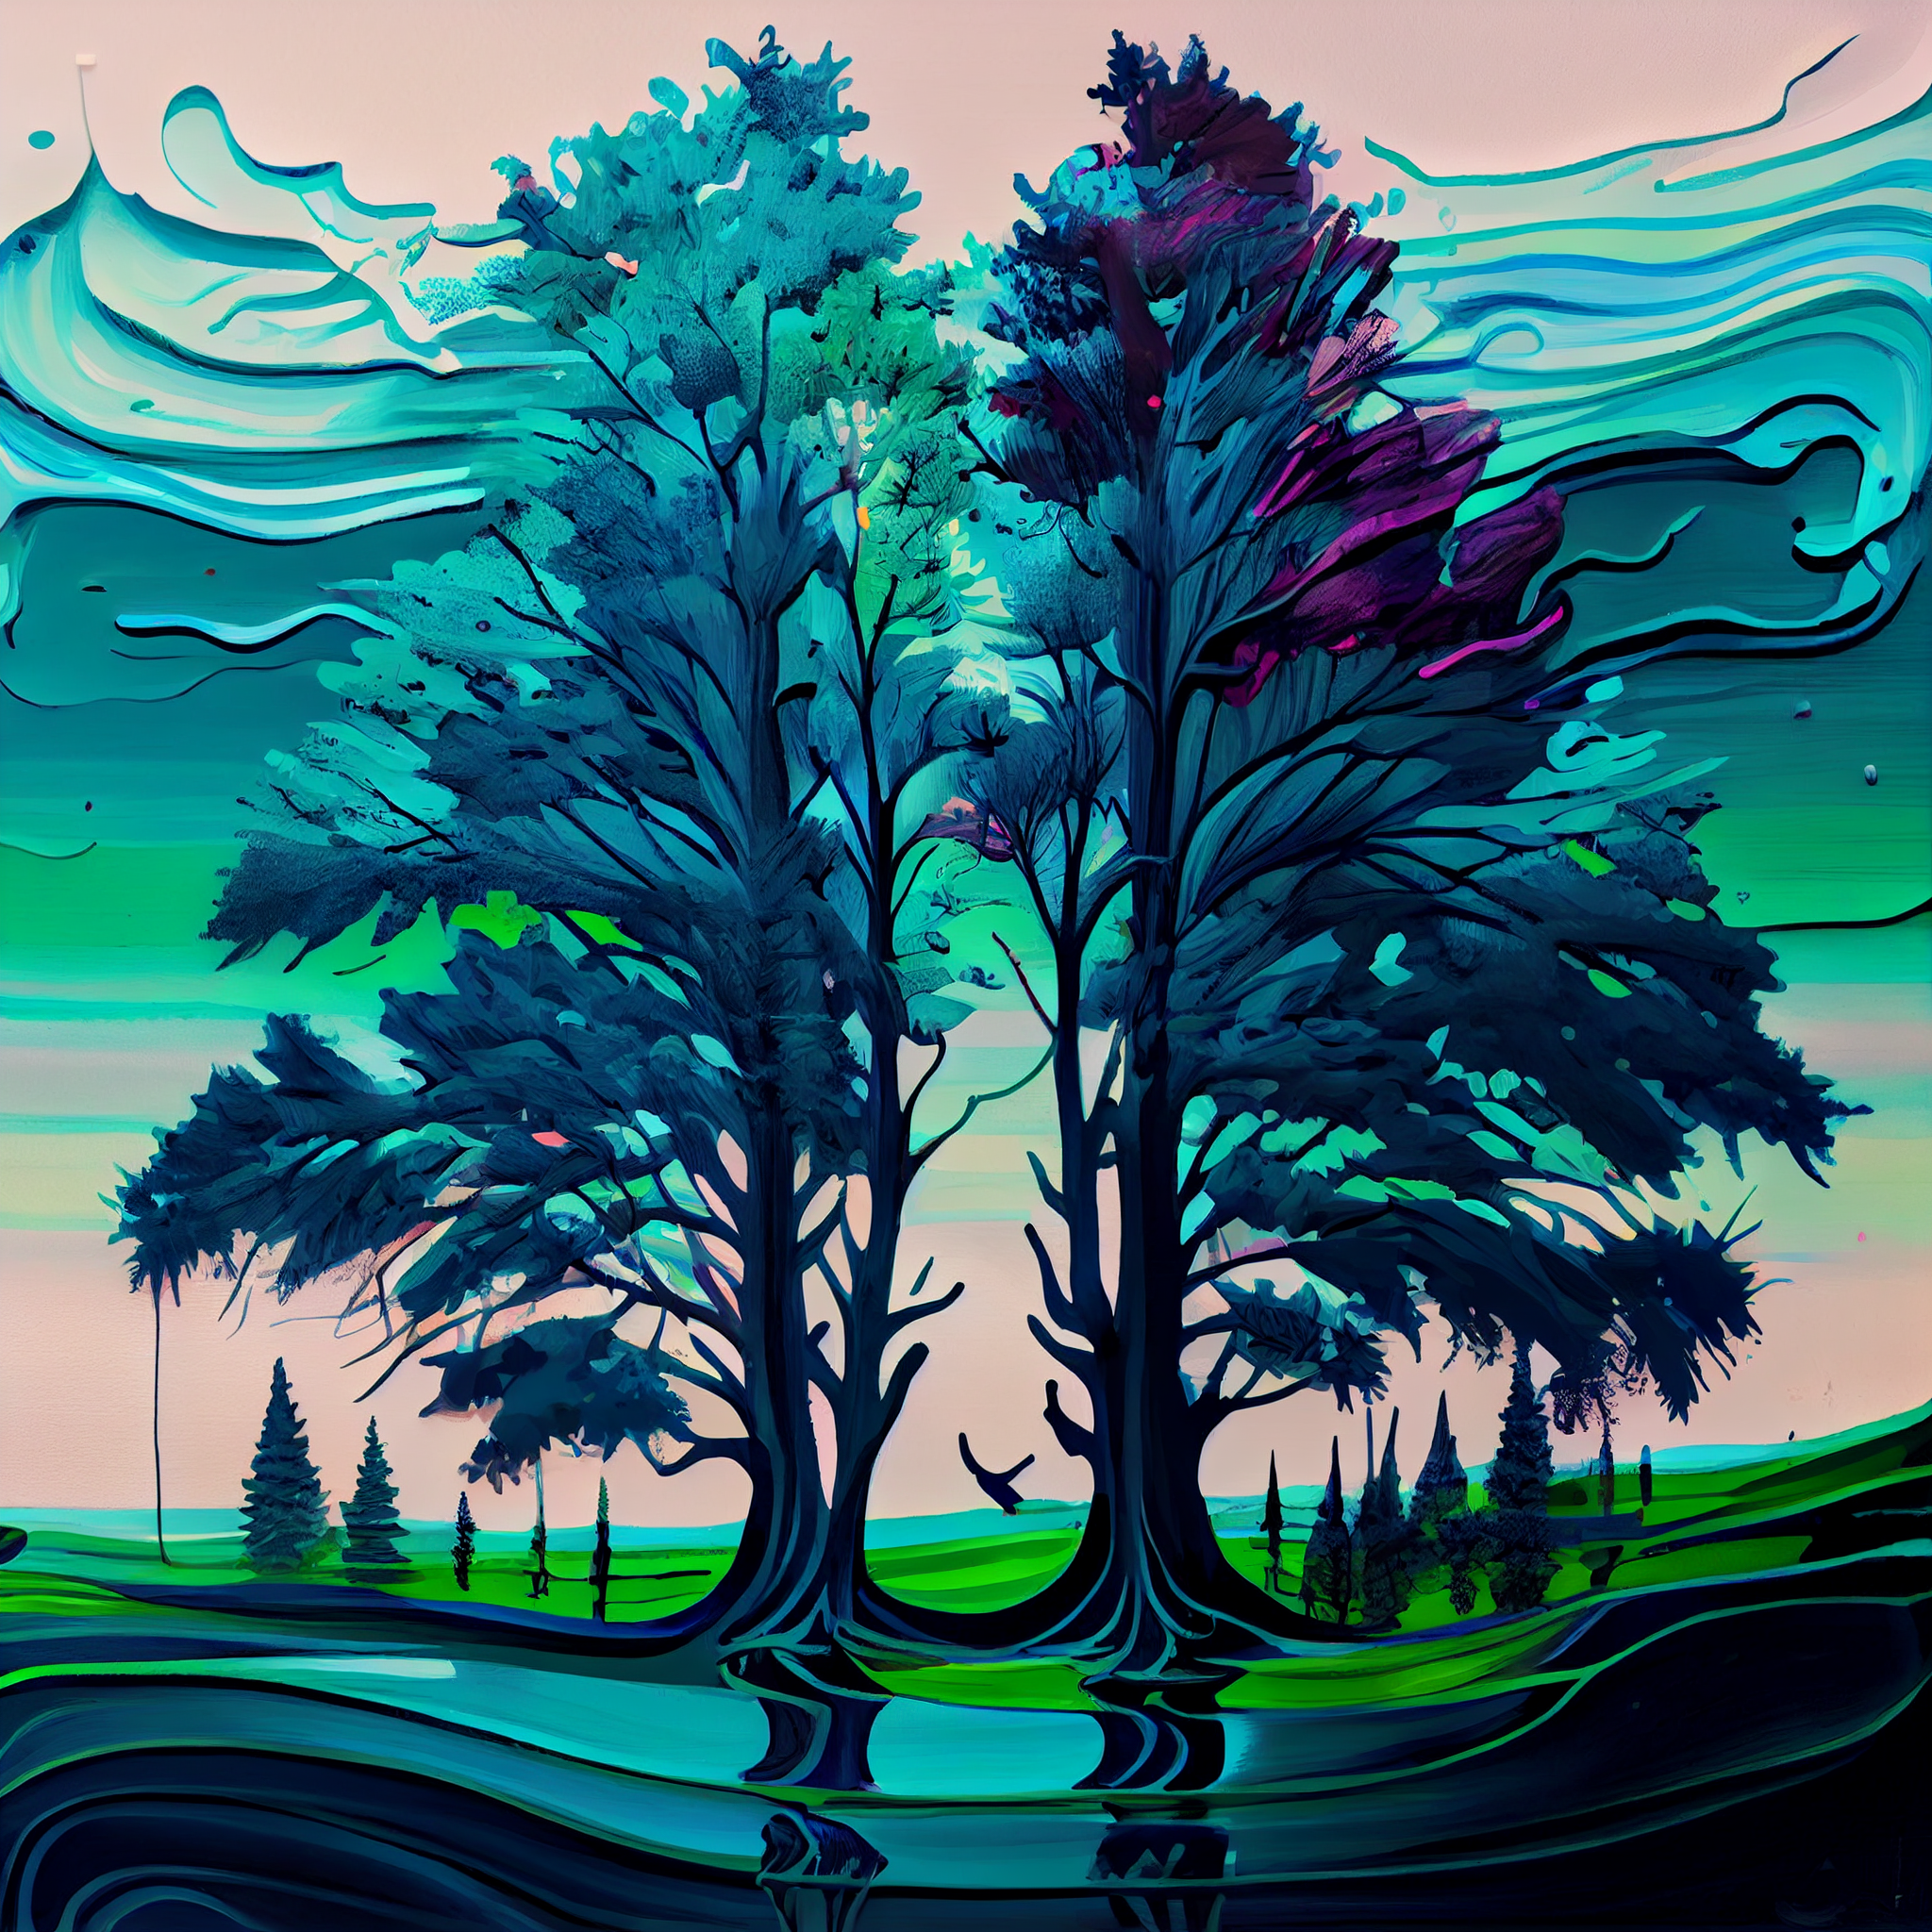 Enchanted Forest: An Acrylic Color Fluid Art Print of a Beautiful Landscape with Big Trees